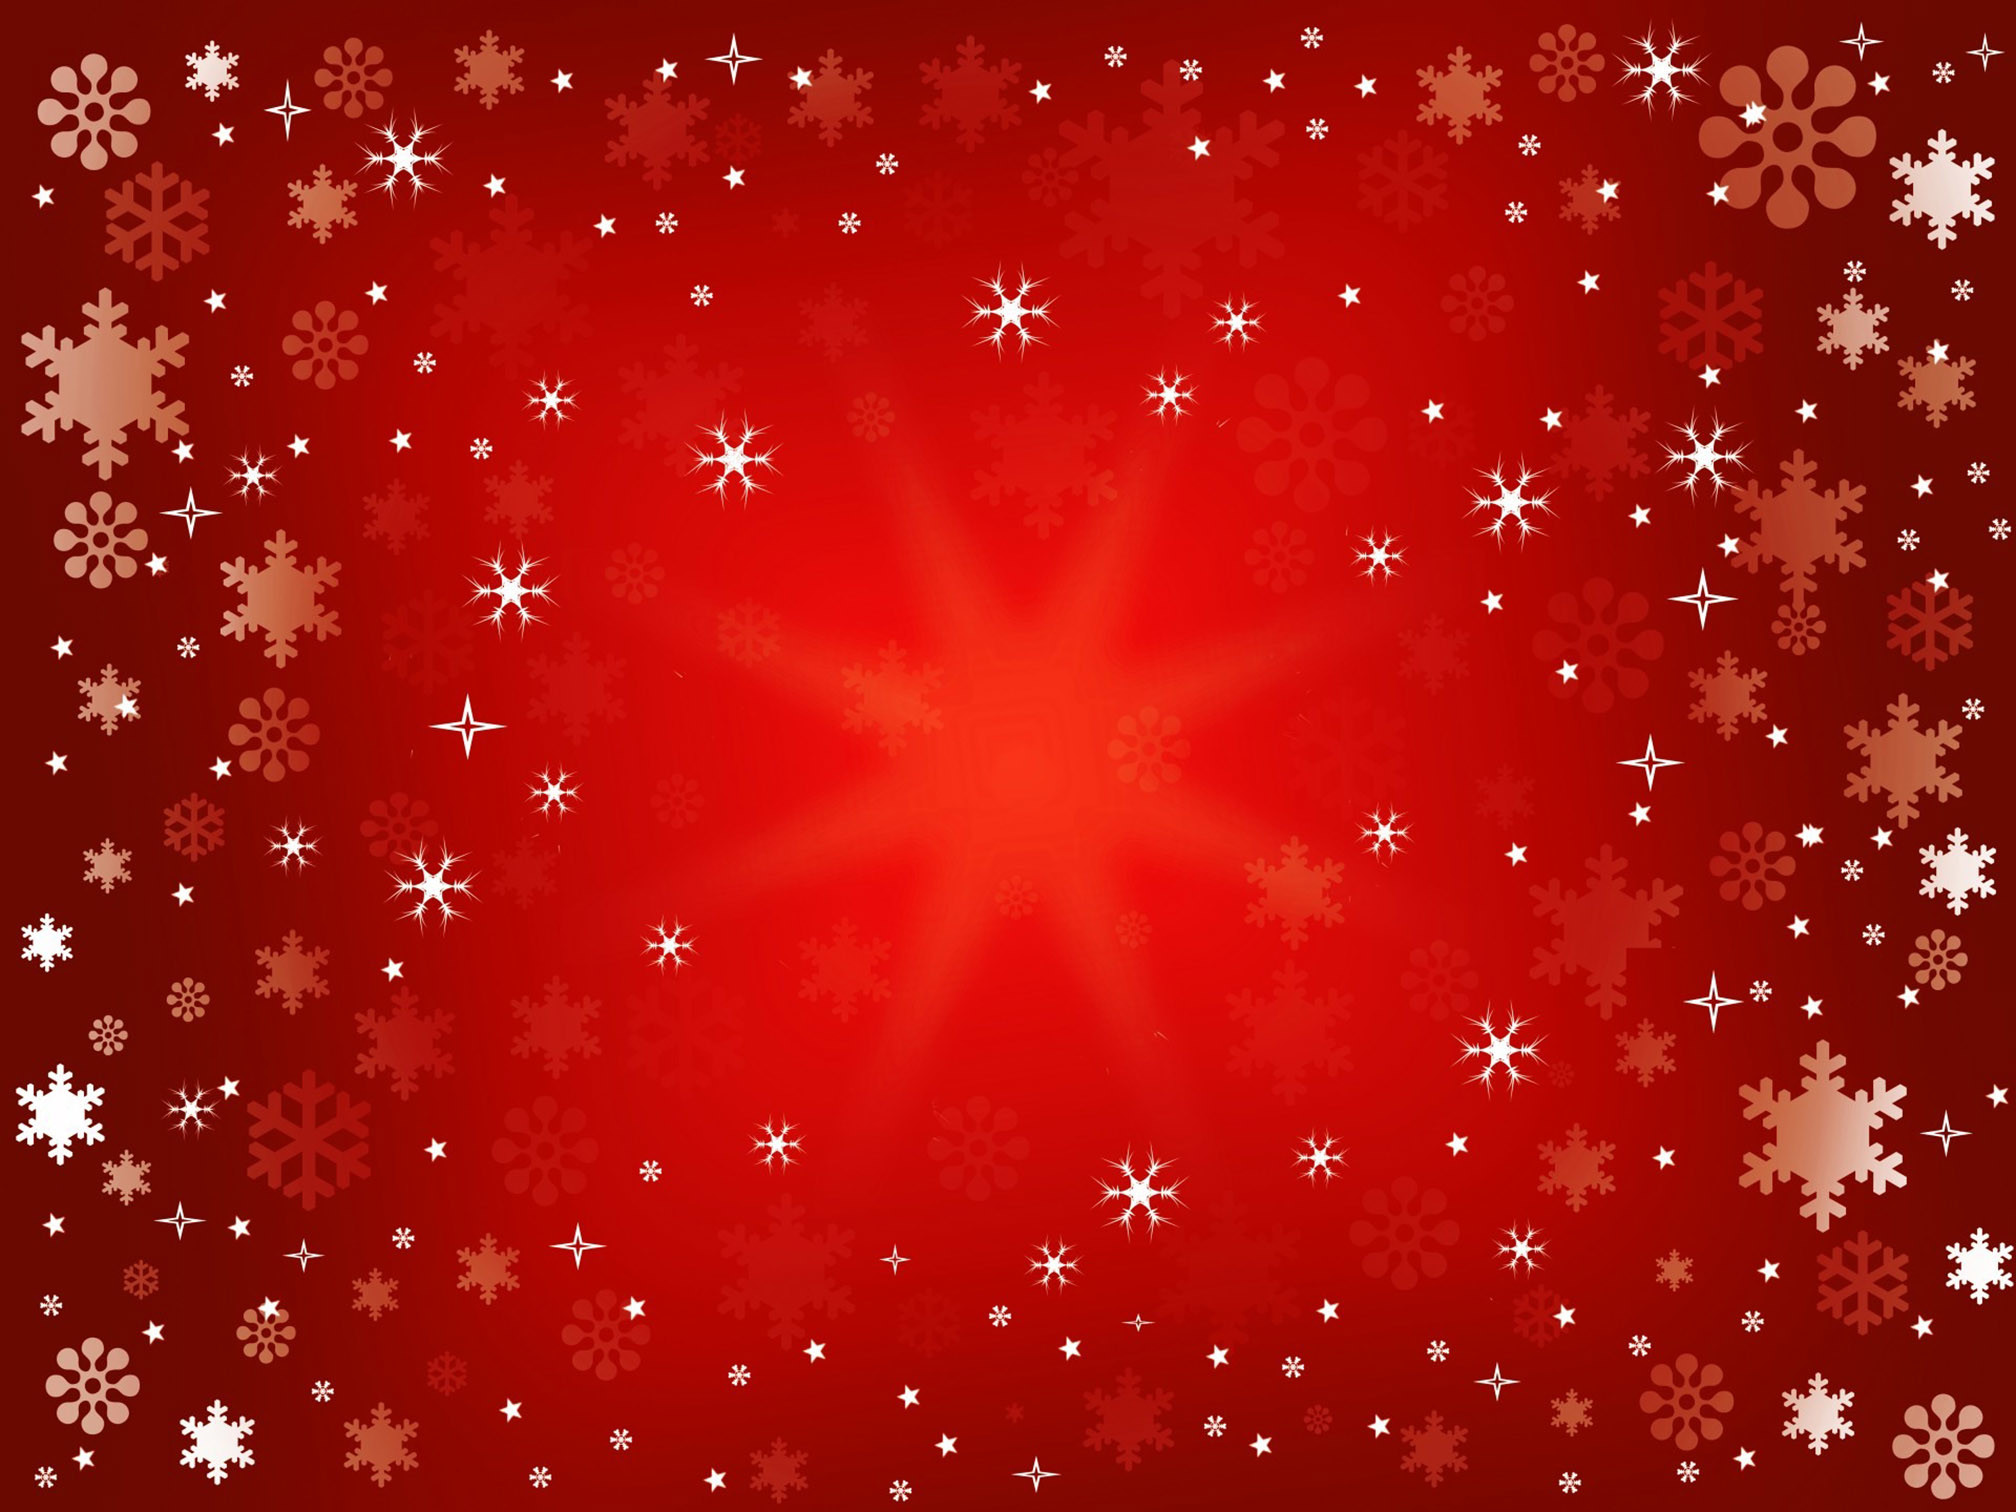 2016x1512 35 Stars at Xmas Background Images, Cards or Christmas Wallpapers |  www.myfreetextures.com | 1500+ Free Textures, Stock Photos & Background  Images